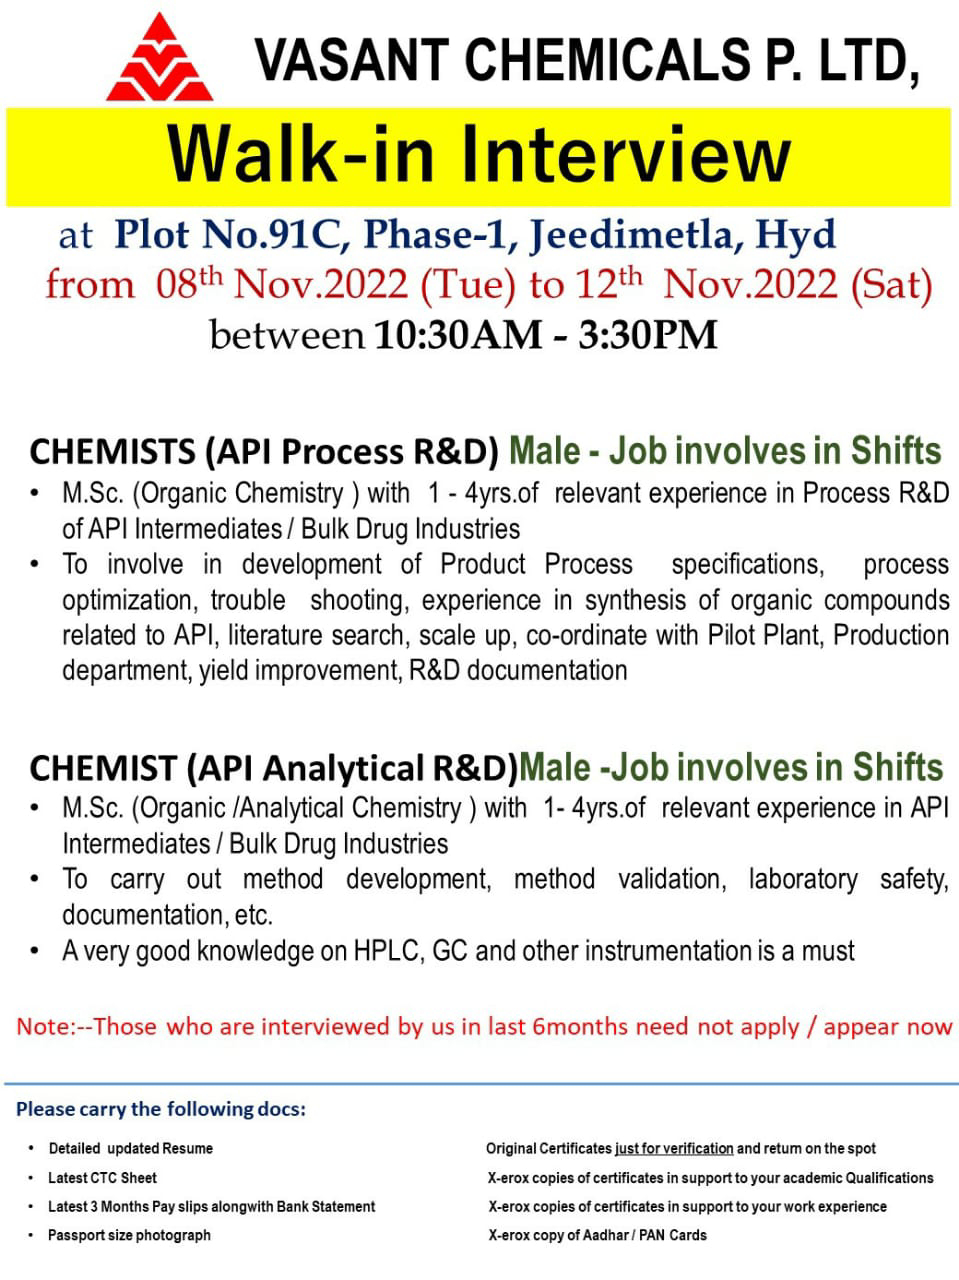 Job Availables, Vasant Chemicals Pvt Ltd Walk-In Interview for MSc Organic Chemistry/ Analytical Chemistry